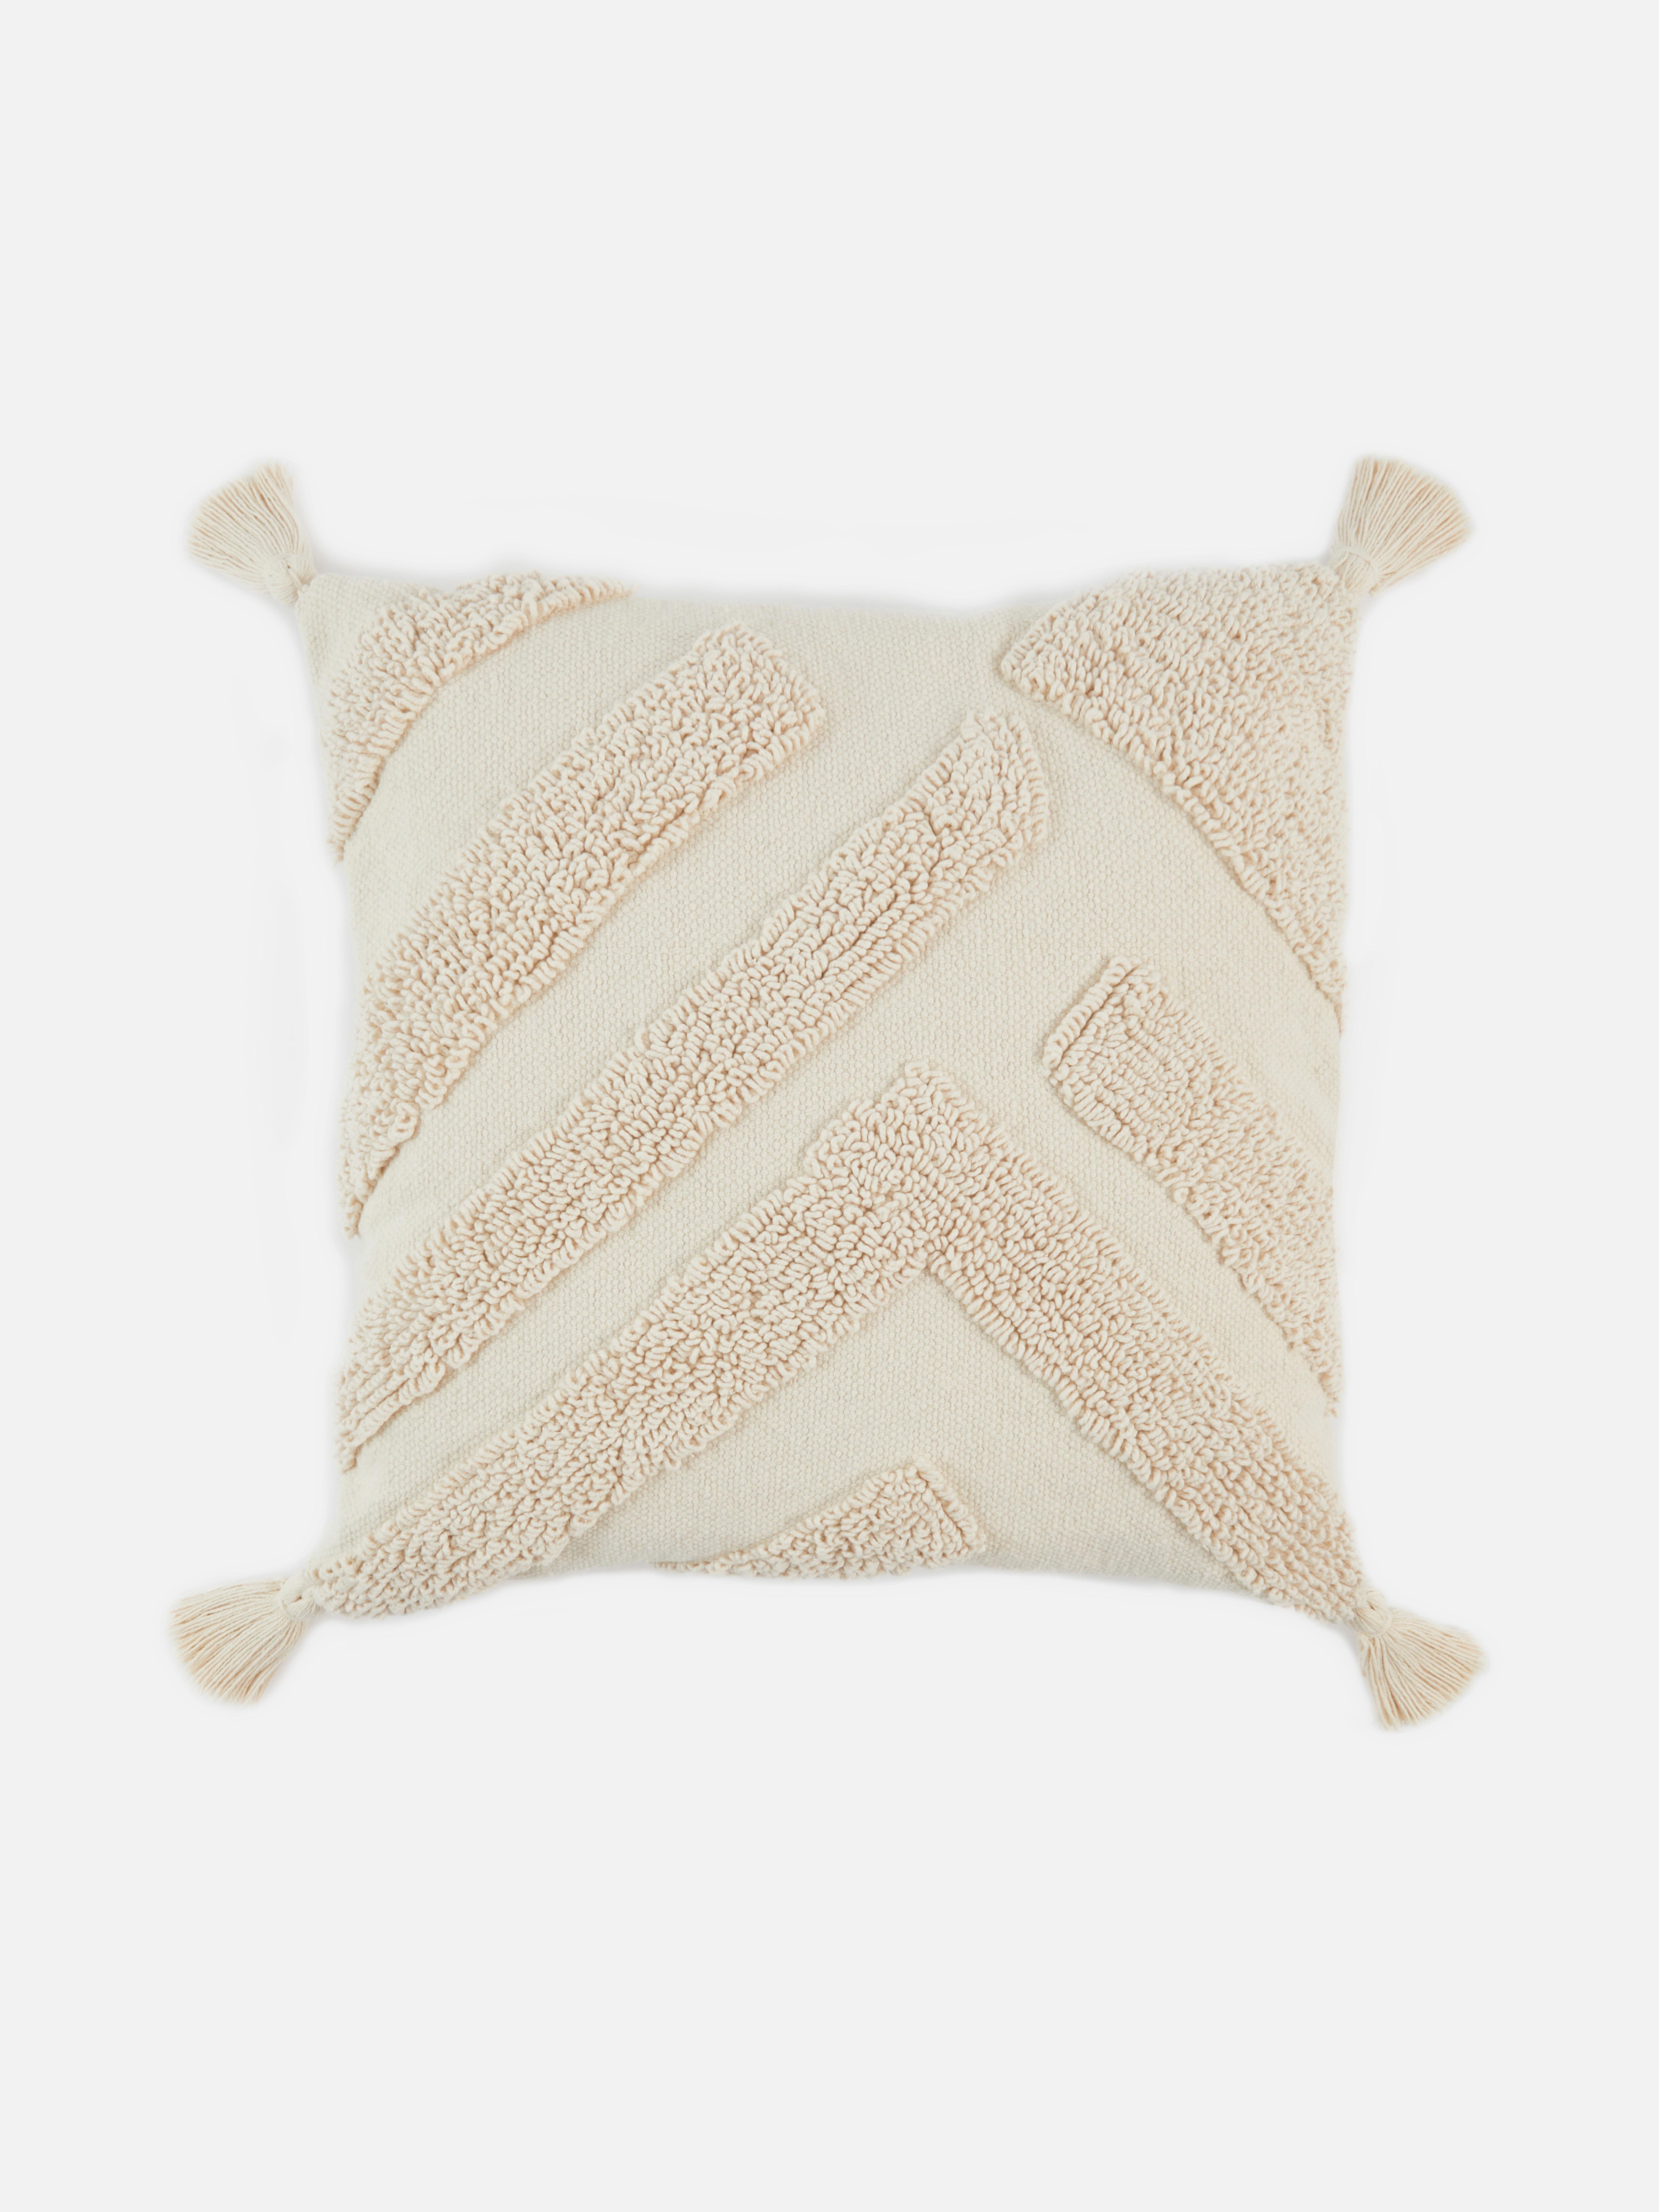 Tufted Square Cushion with Tassels